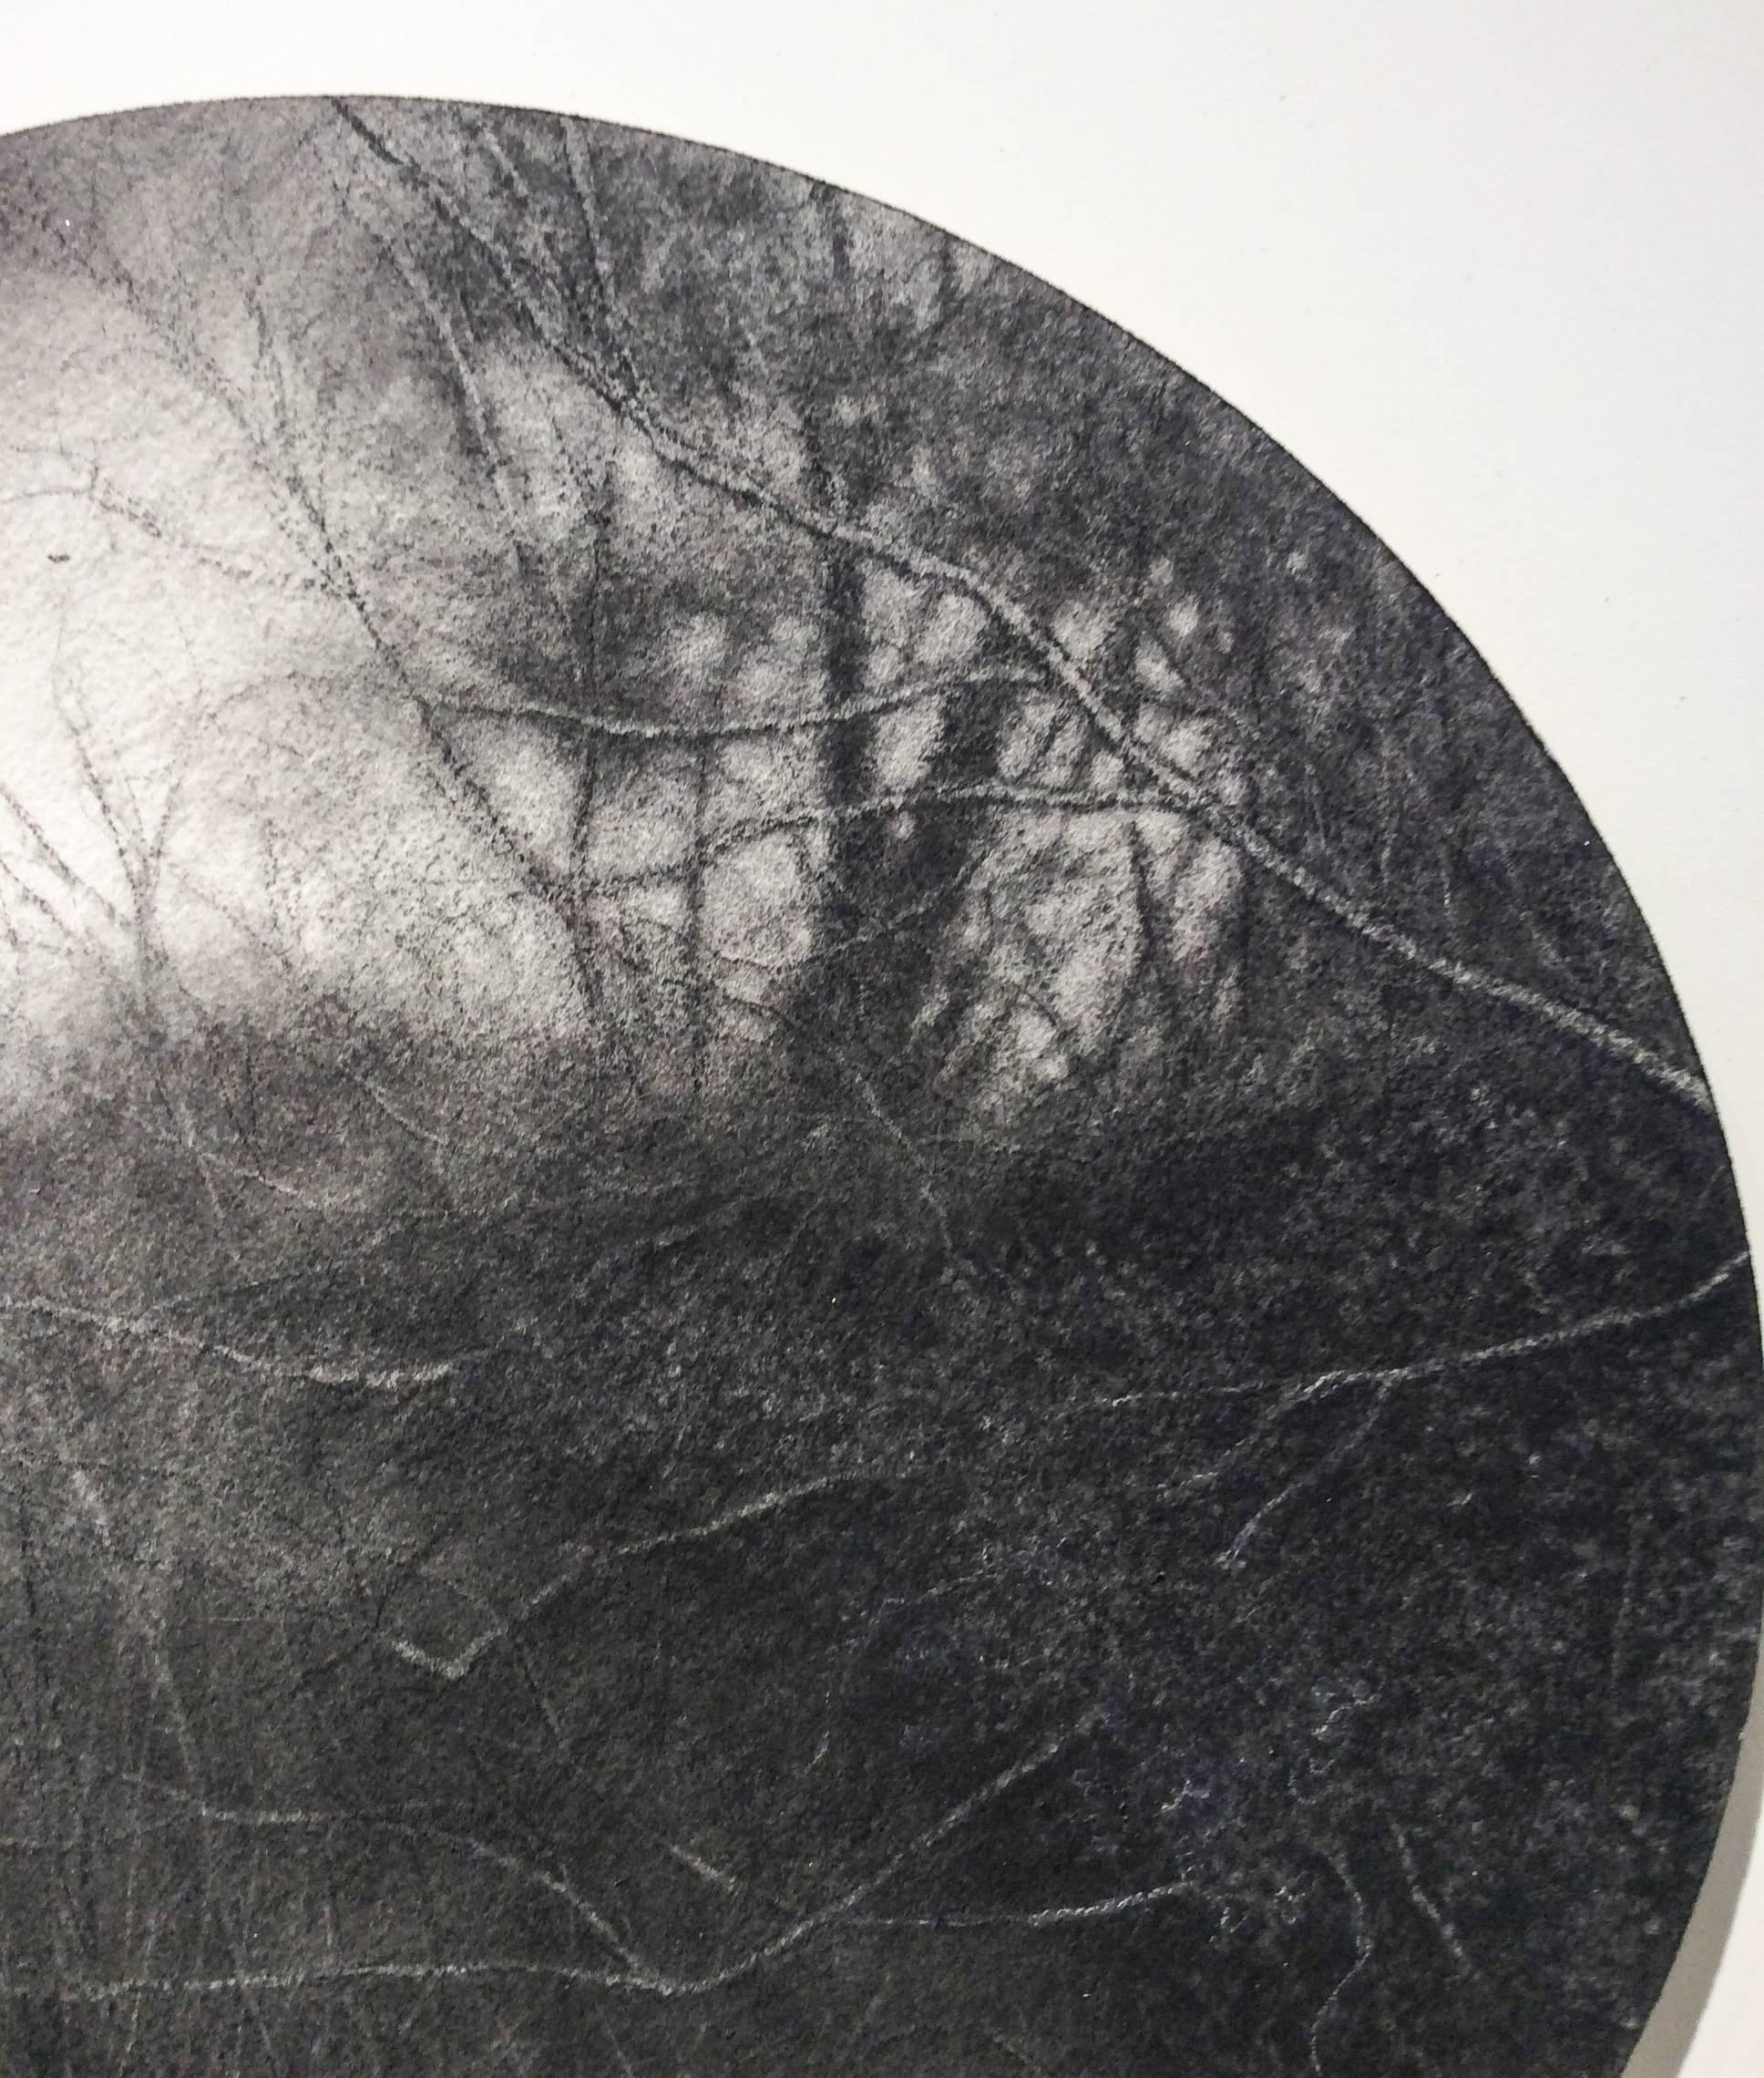 Aperture (Realistic Charcoal Landscape Drawing of Forest on Circular Panel) - Contemporary Art by Sue Bryan